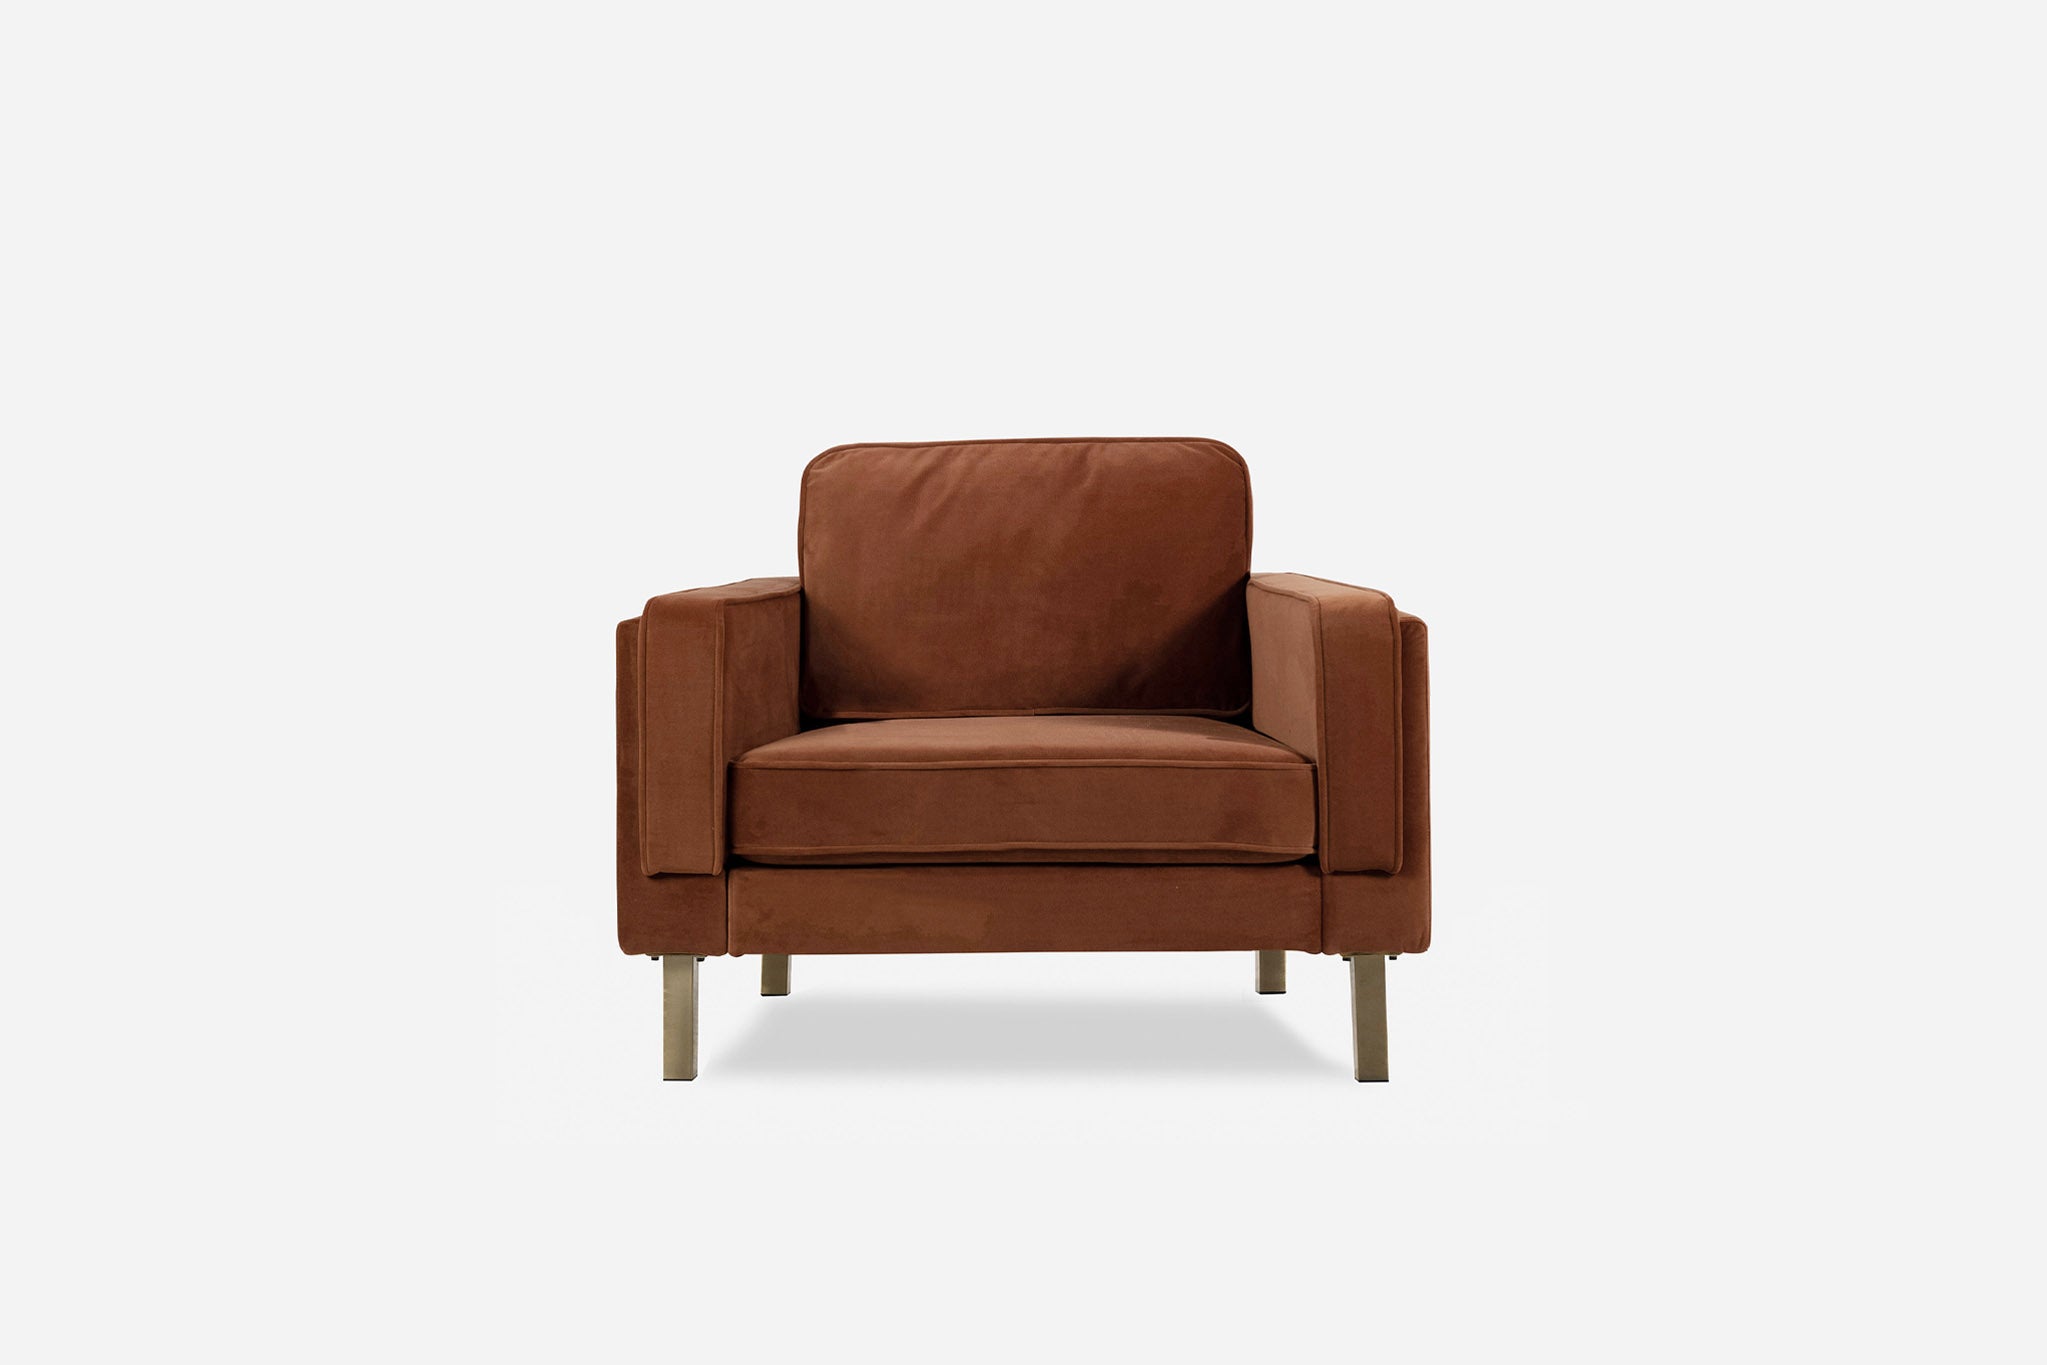 albany armchair shown in rust velvet with gold legs